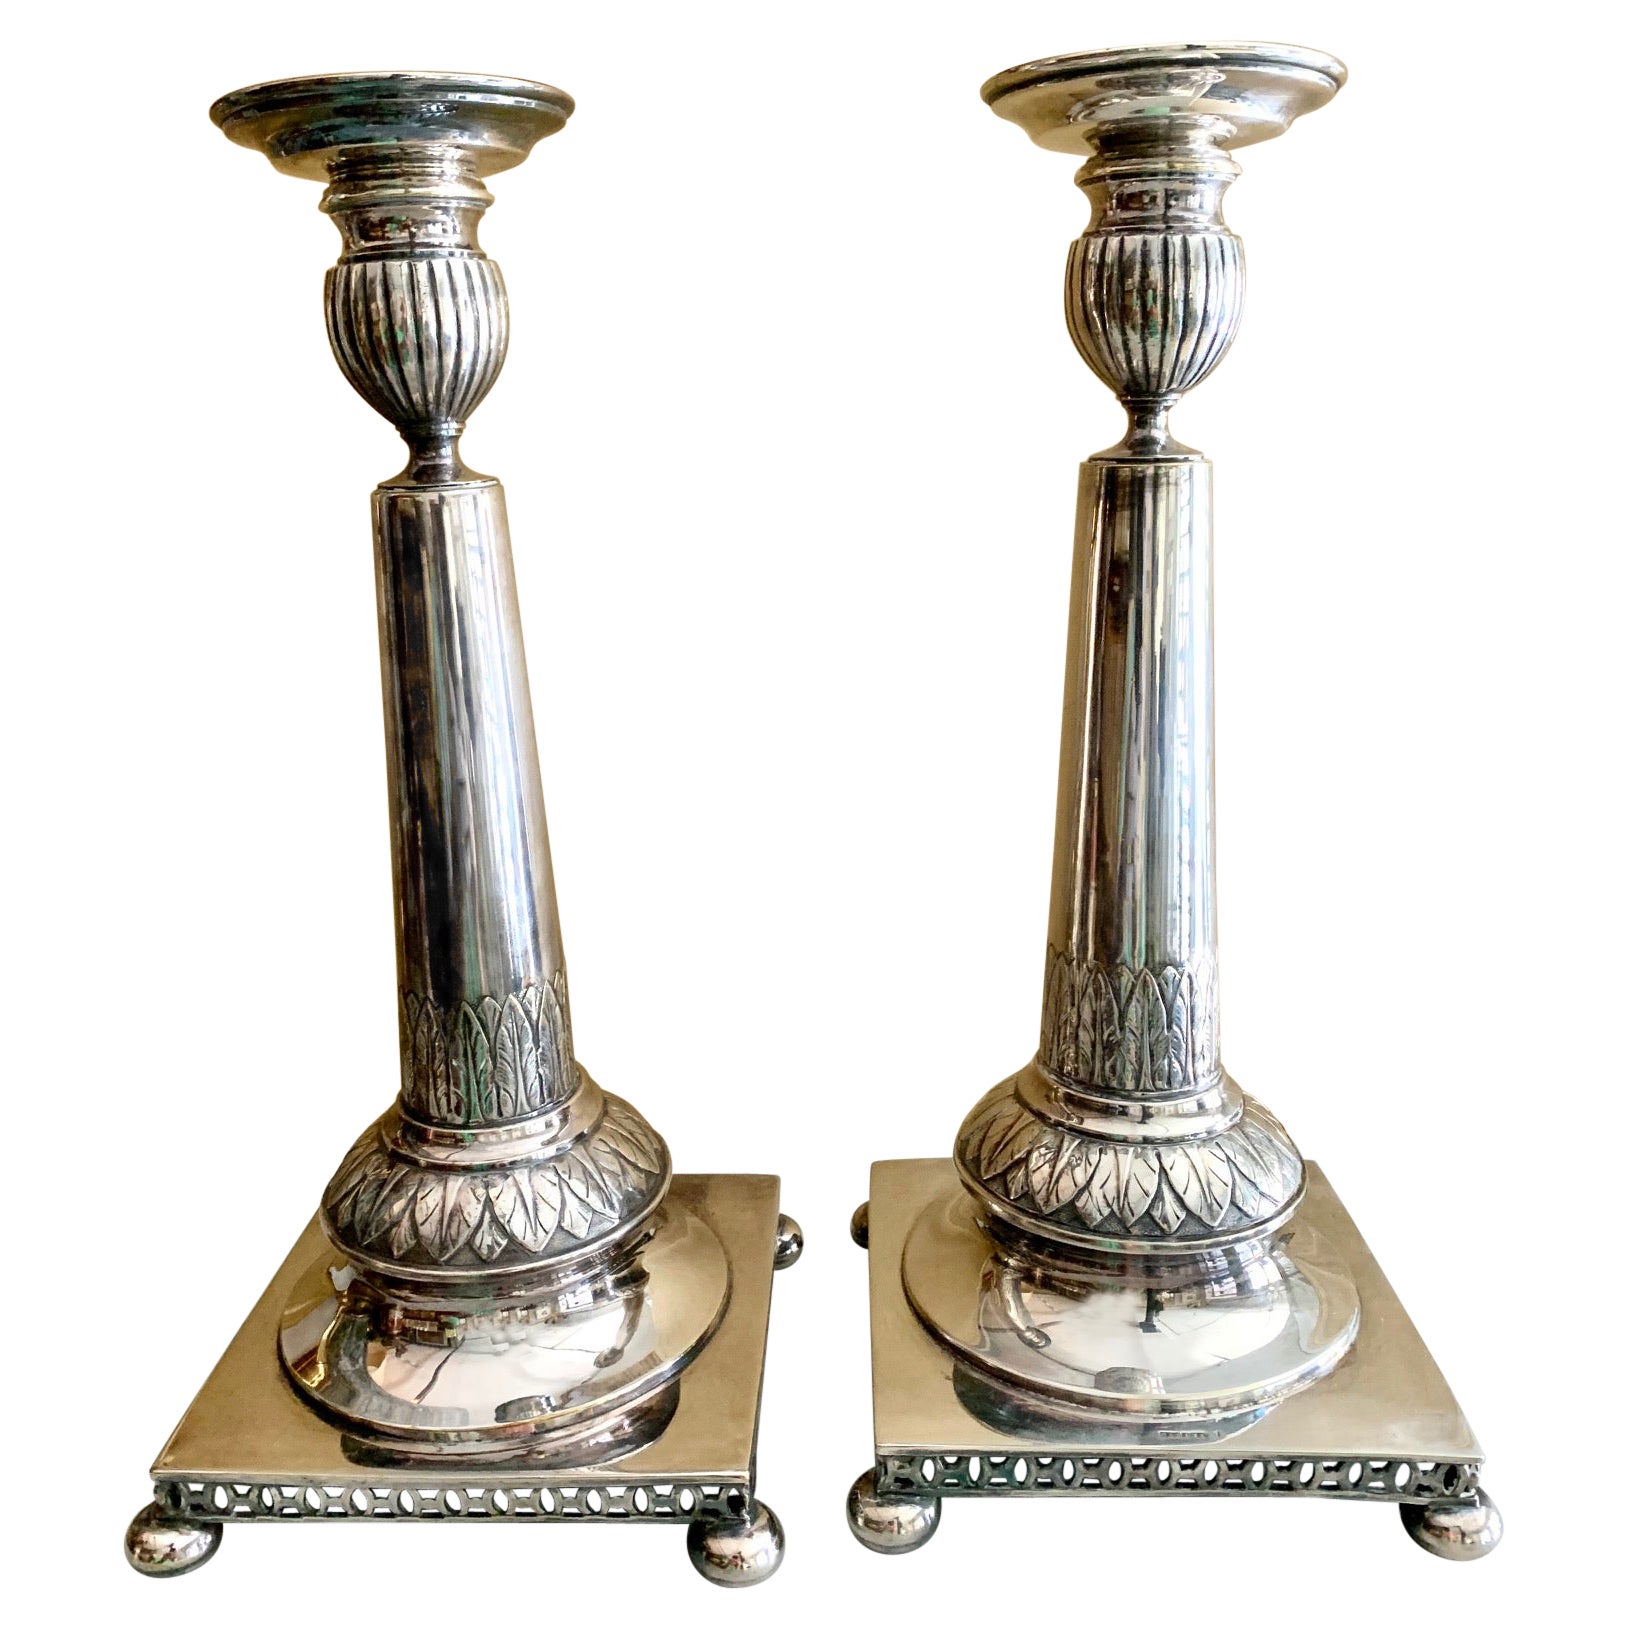 2oth Century Pair of Candlesticks in Silver Metal